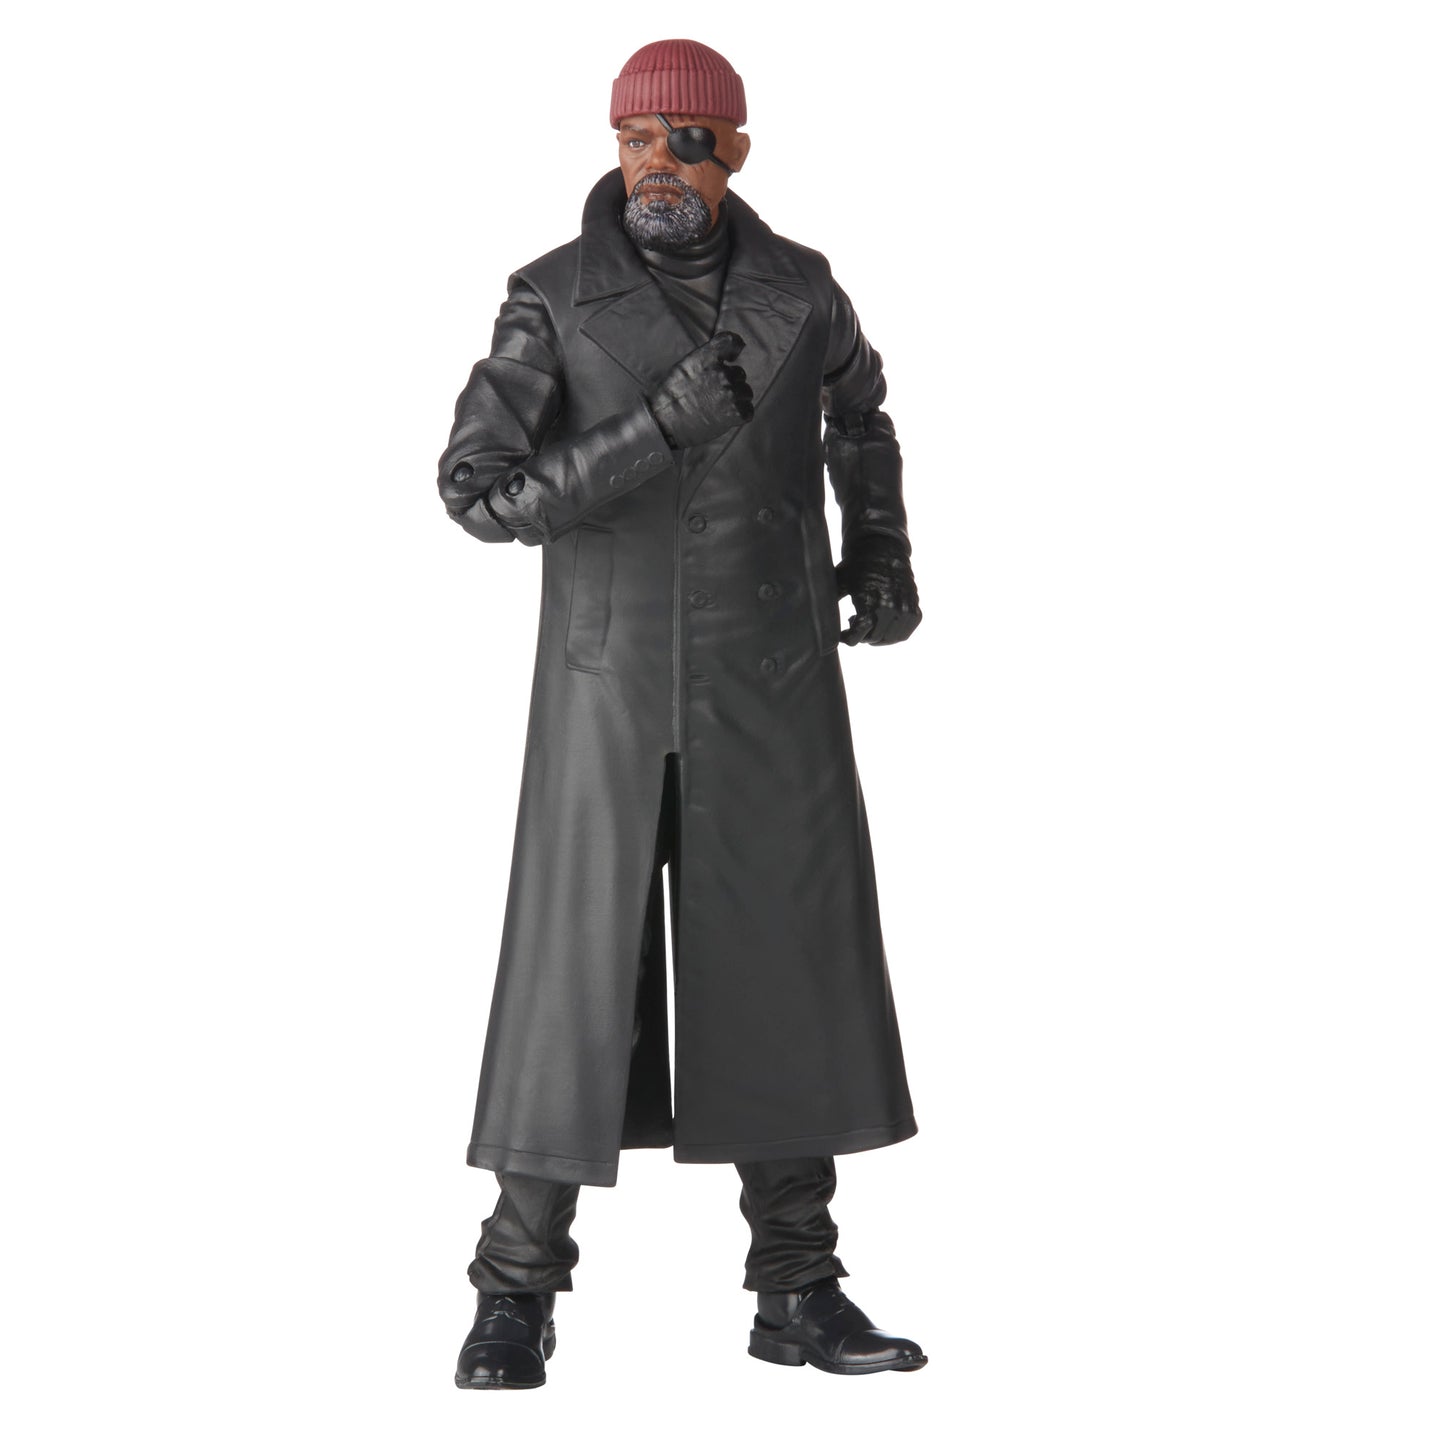 Marvel Legends Series Nick Fury Action Figure 6-Inch Toy standing tall - Heretoserveyou